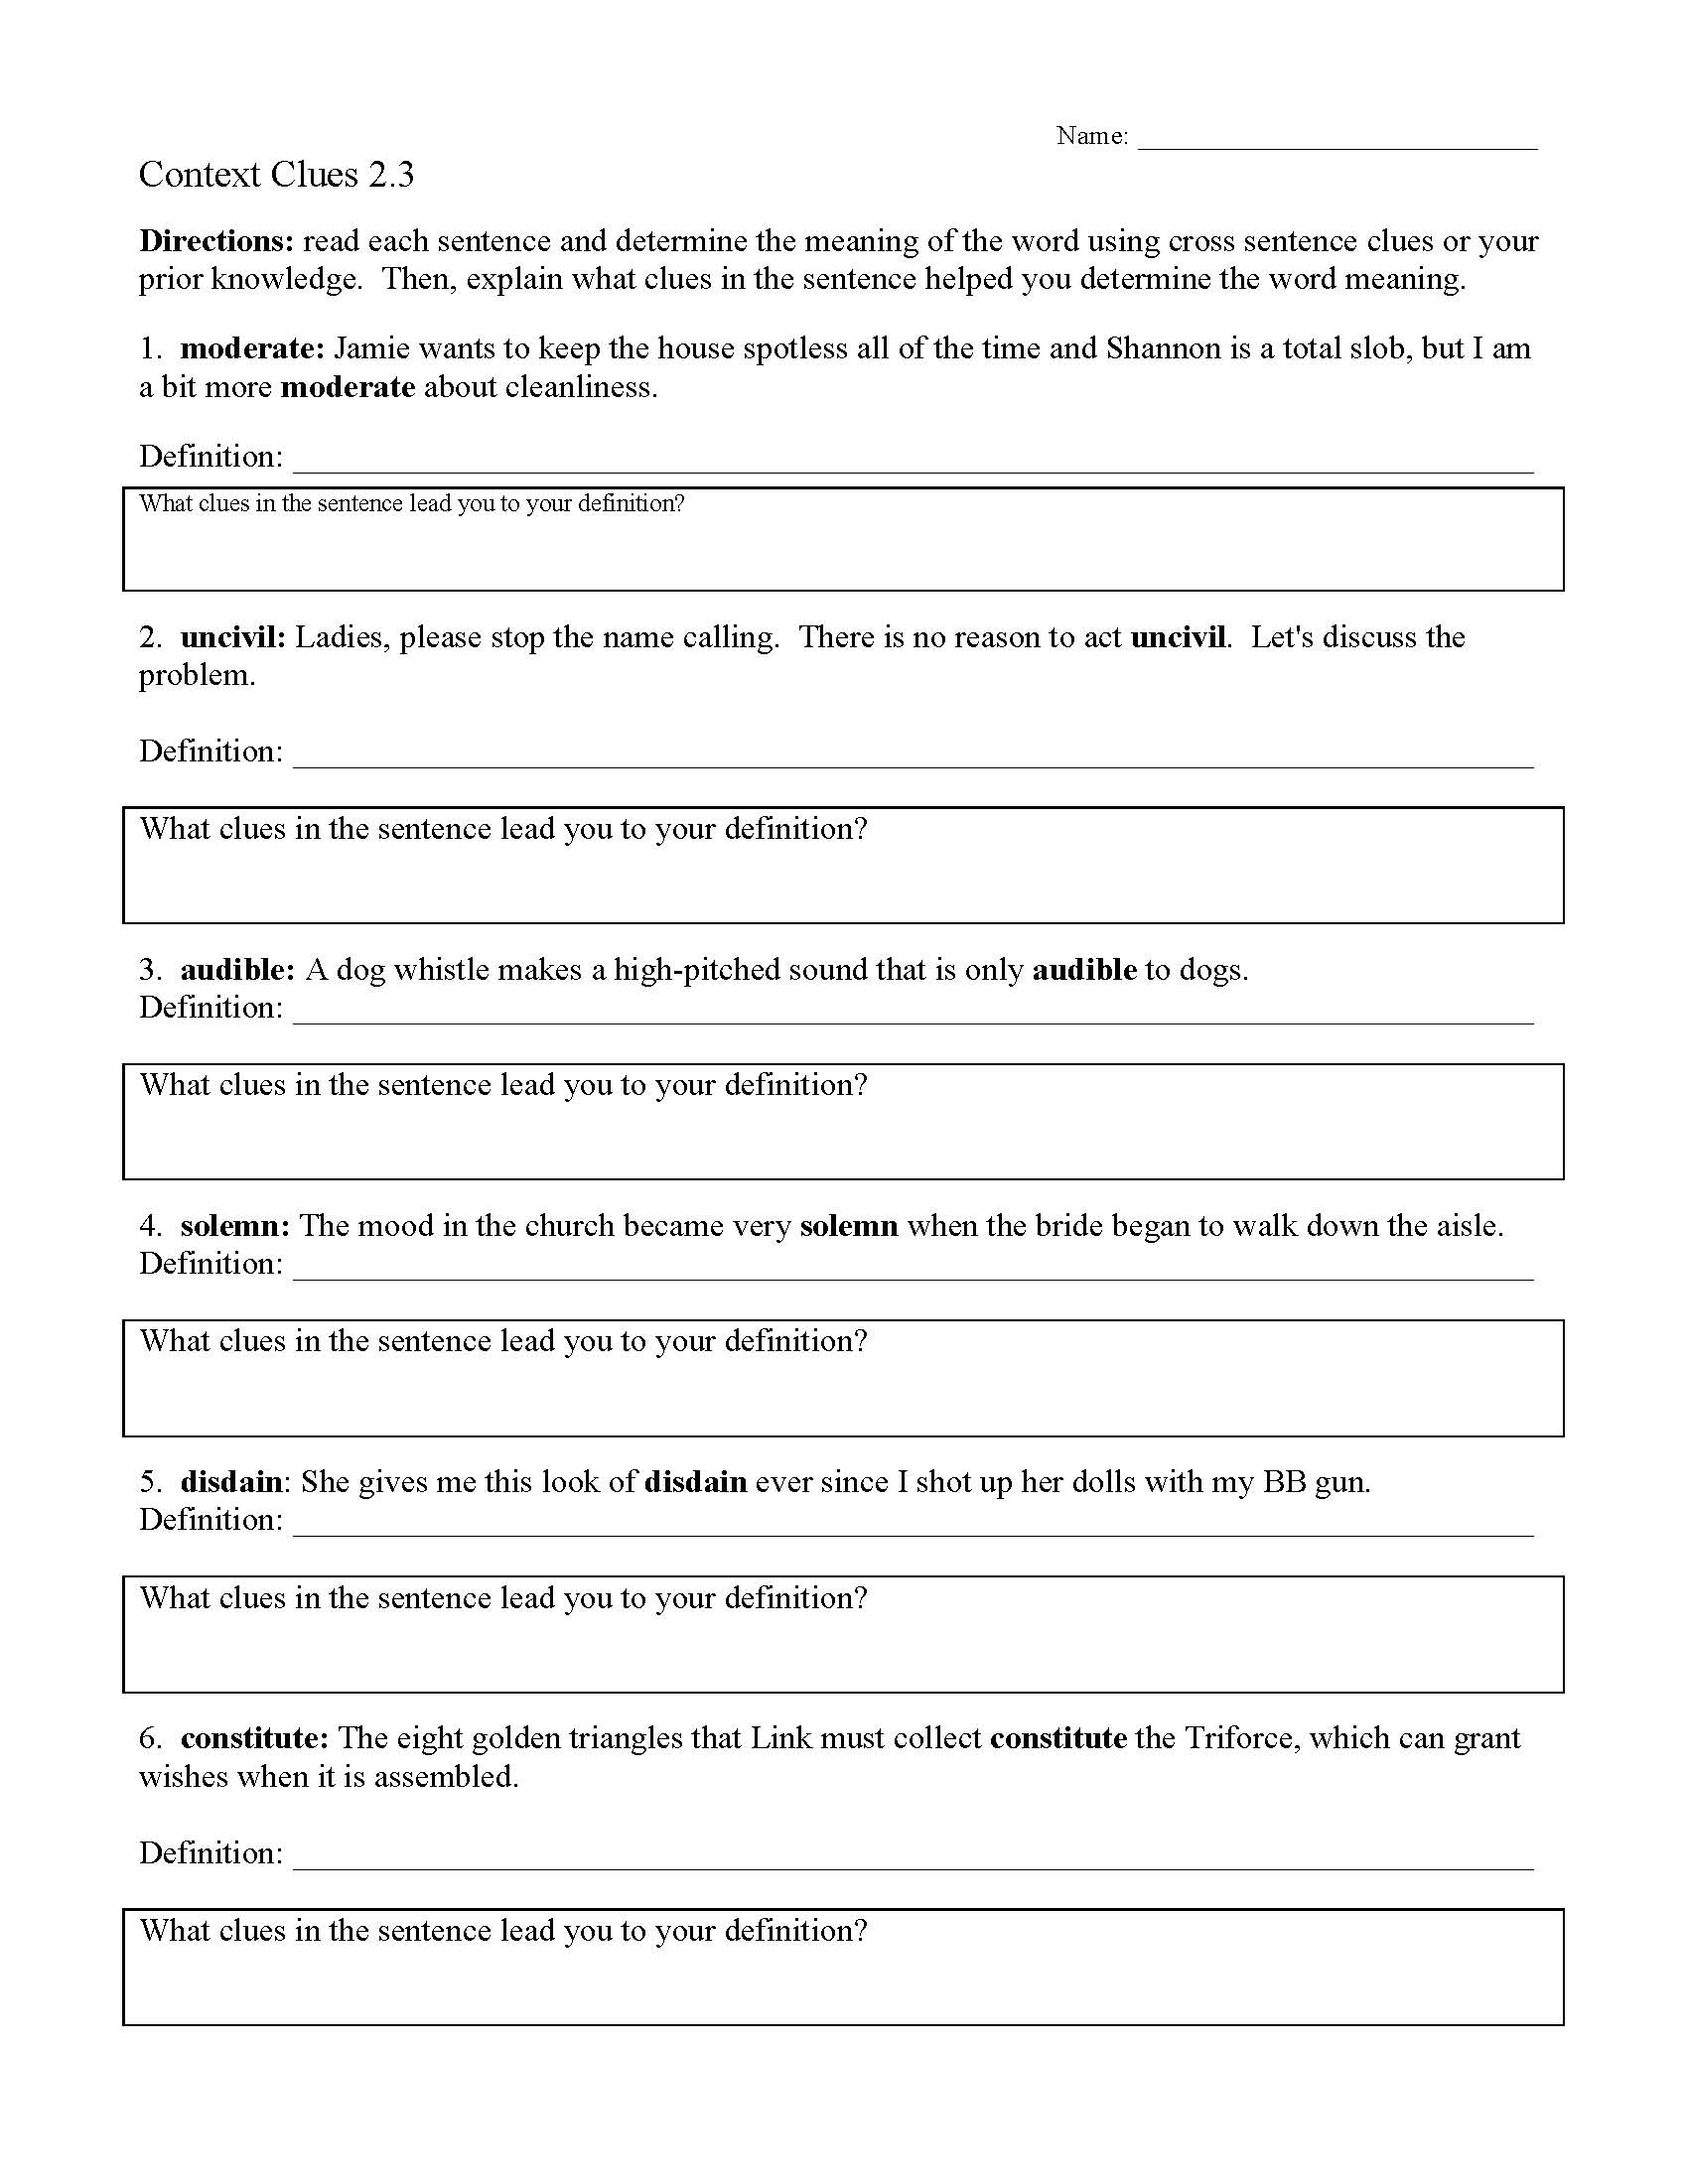 Context Clues Worksheets Ereading Worksheets